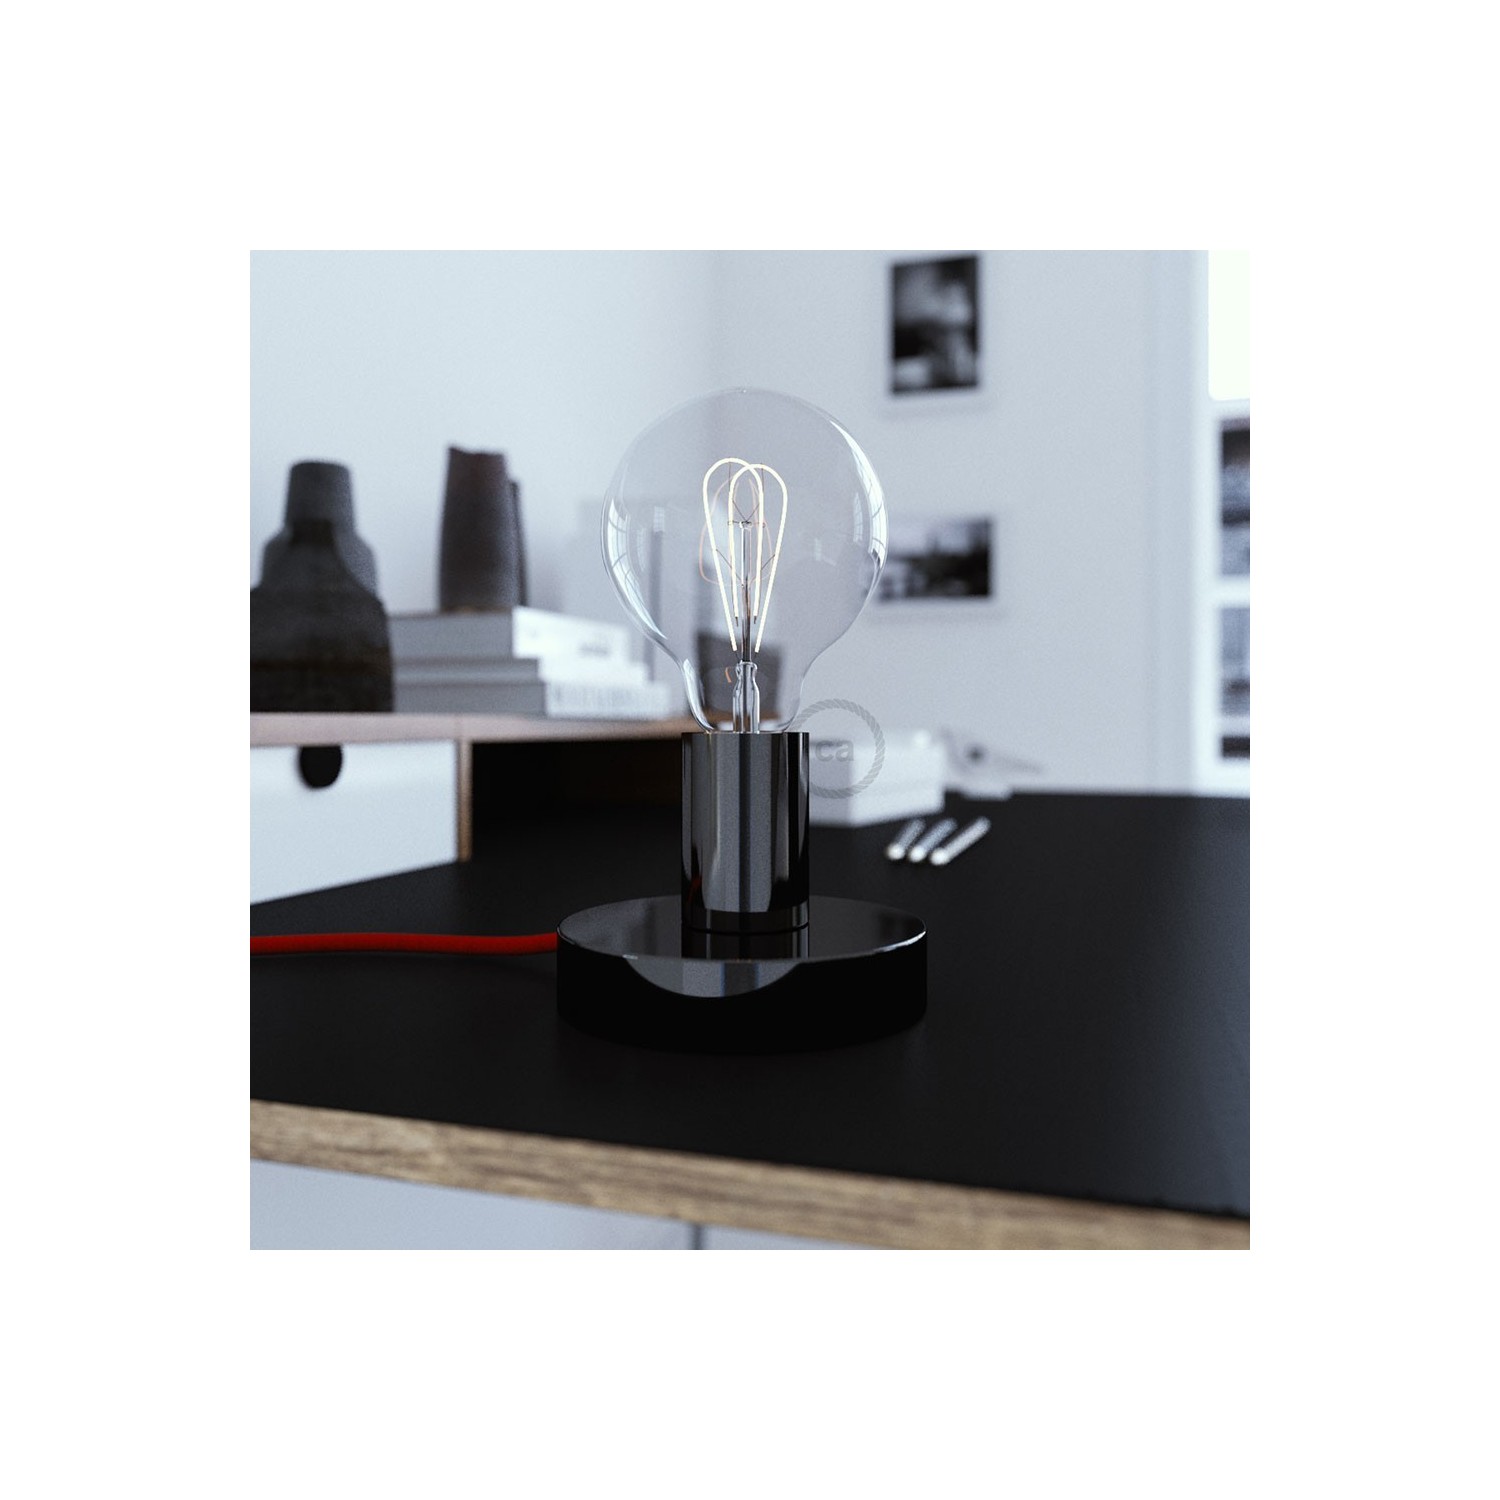 Posaluce, the black pearl metal table lamp, with textile cable, in-line switch and english plug